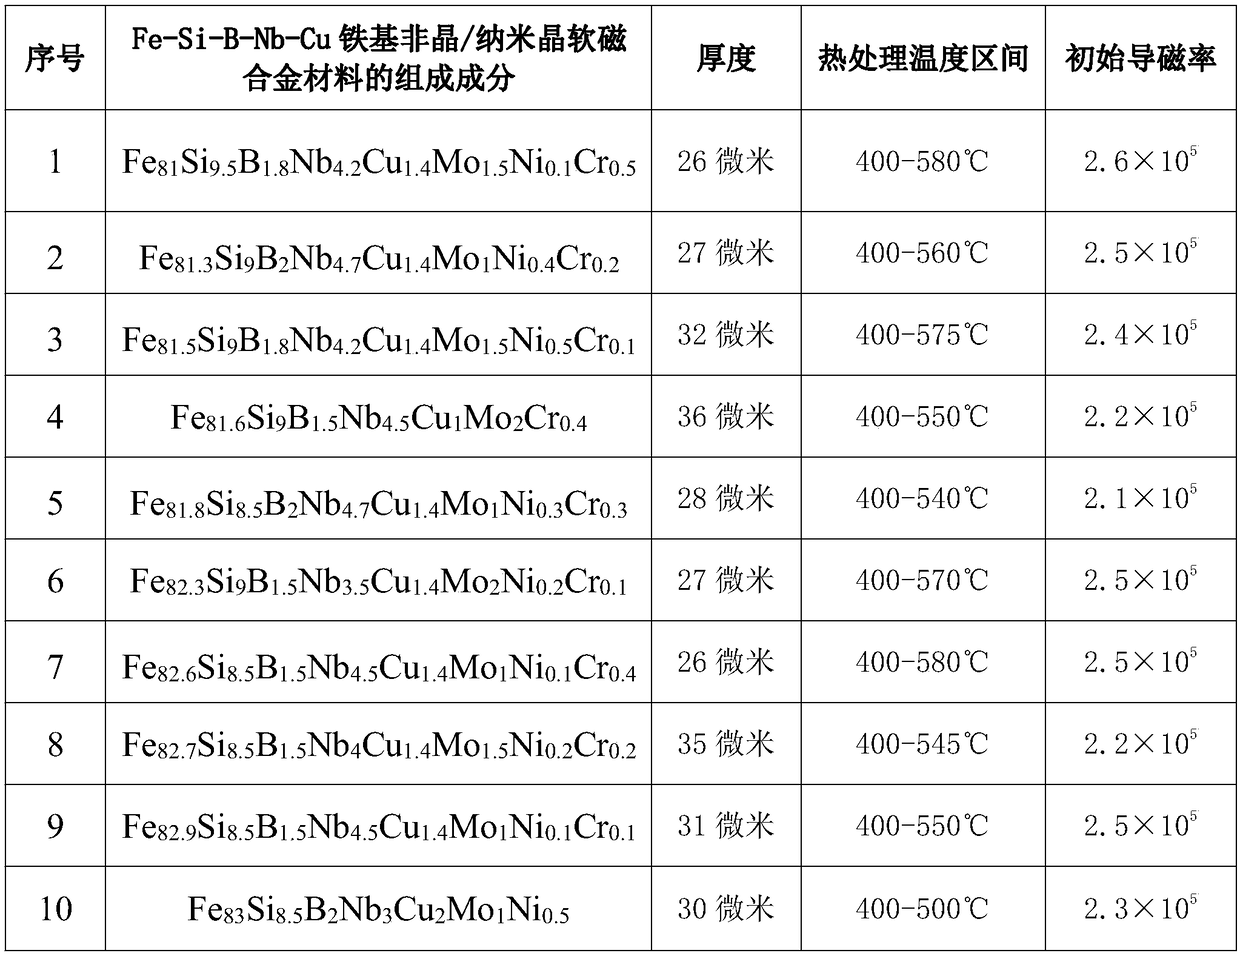 fe-si-b-nb-cu iron-based amorphous/nanocrystalline soft magnetic alloy material and its preparation and heat treatment process